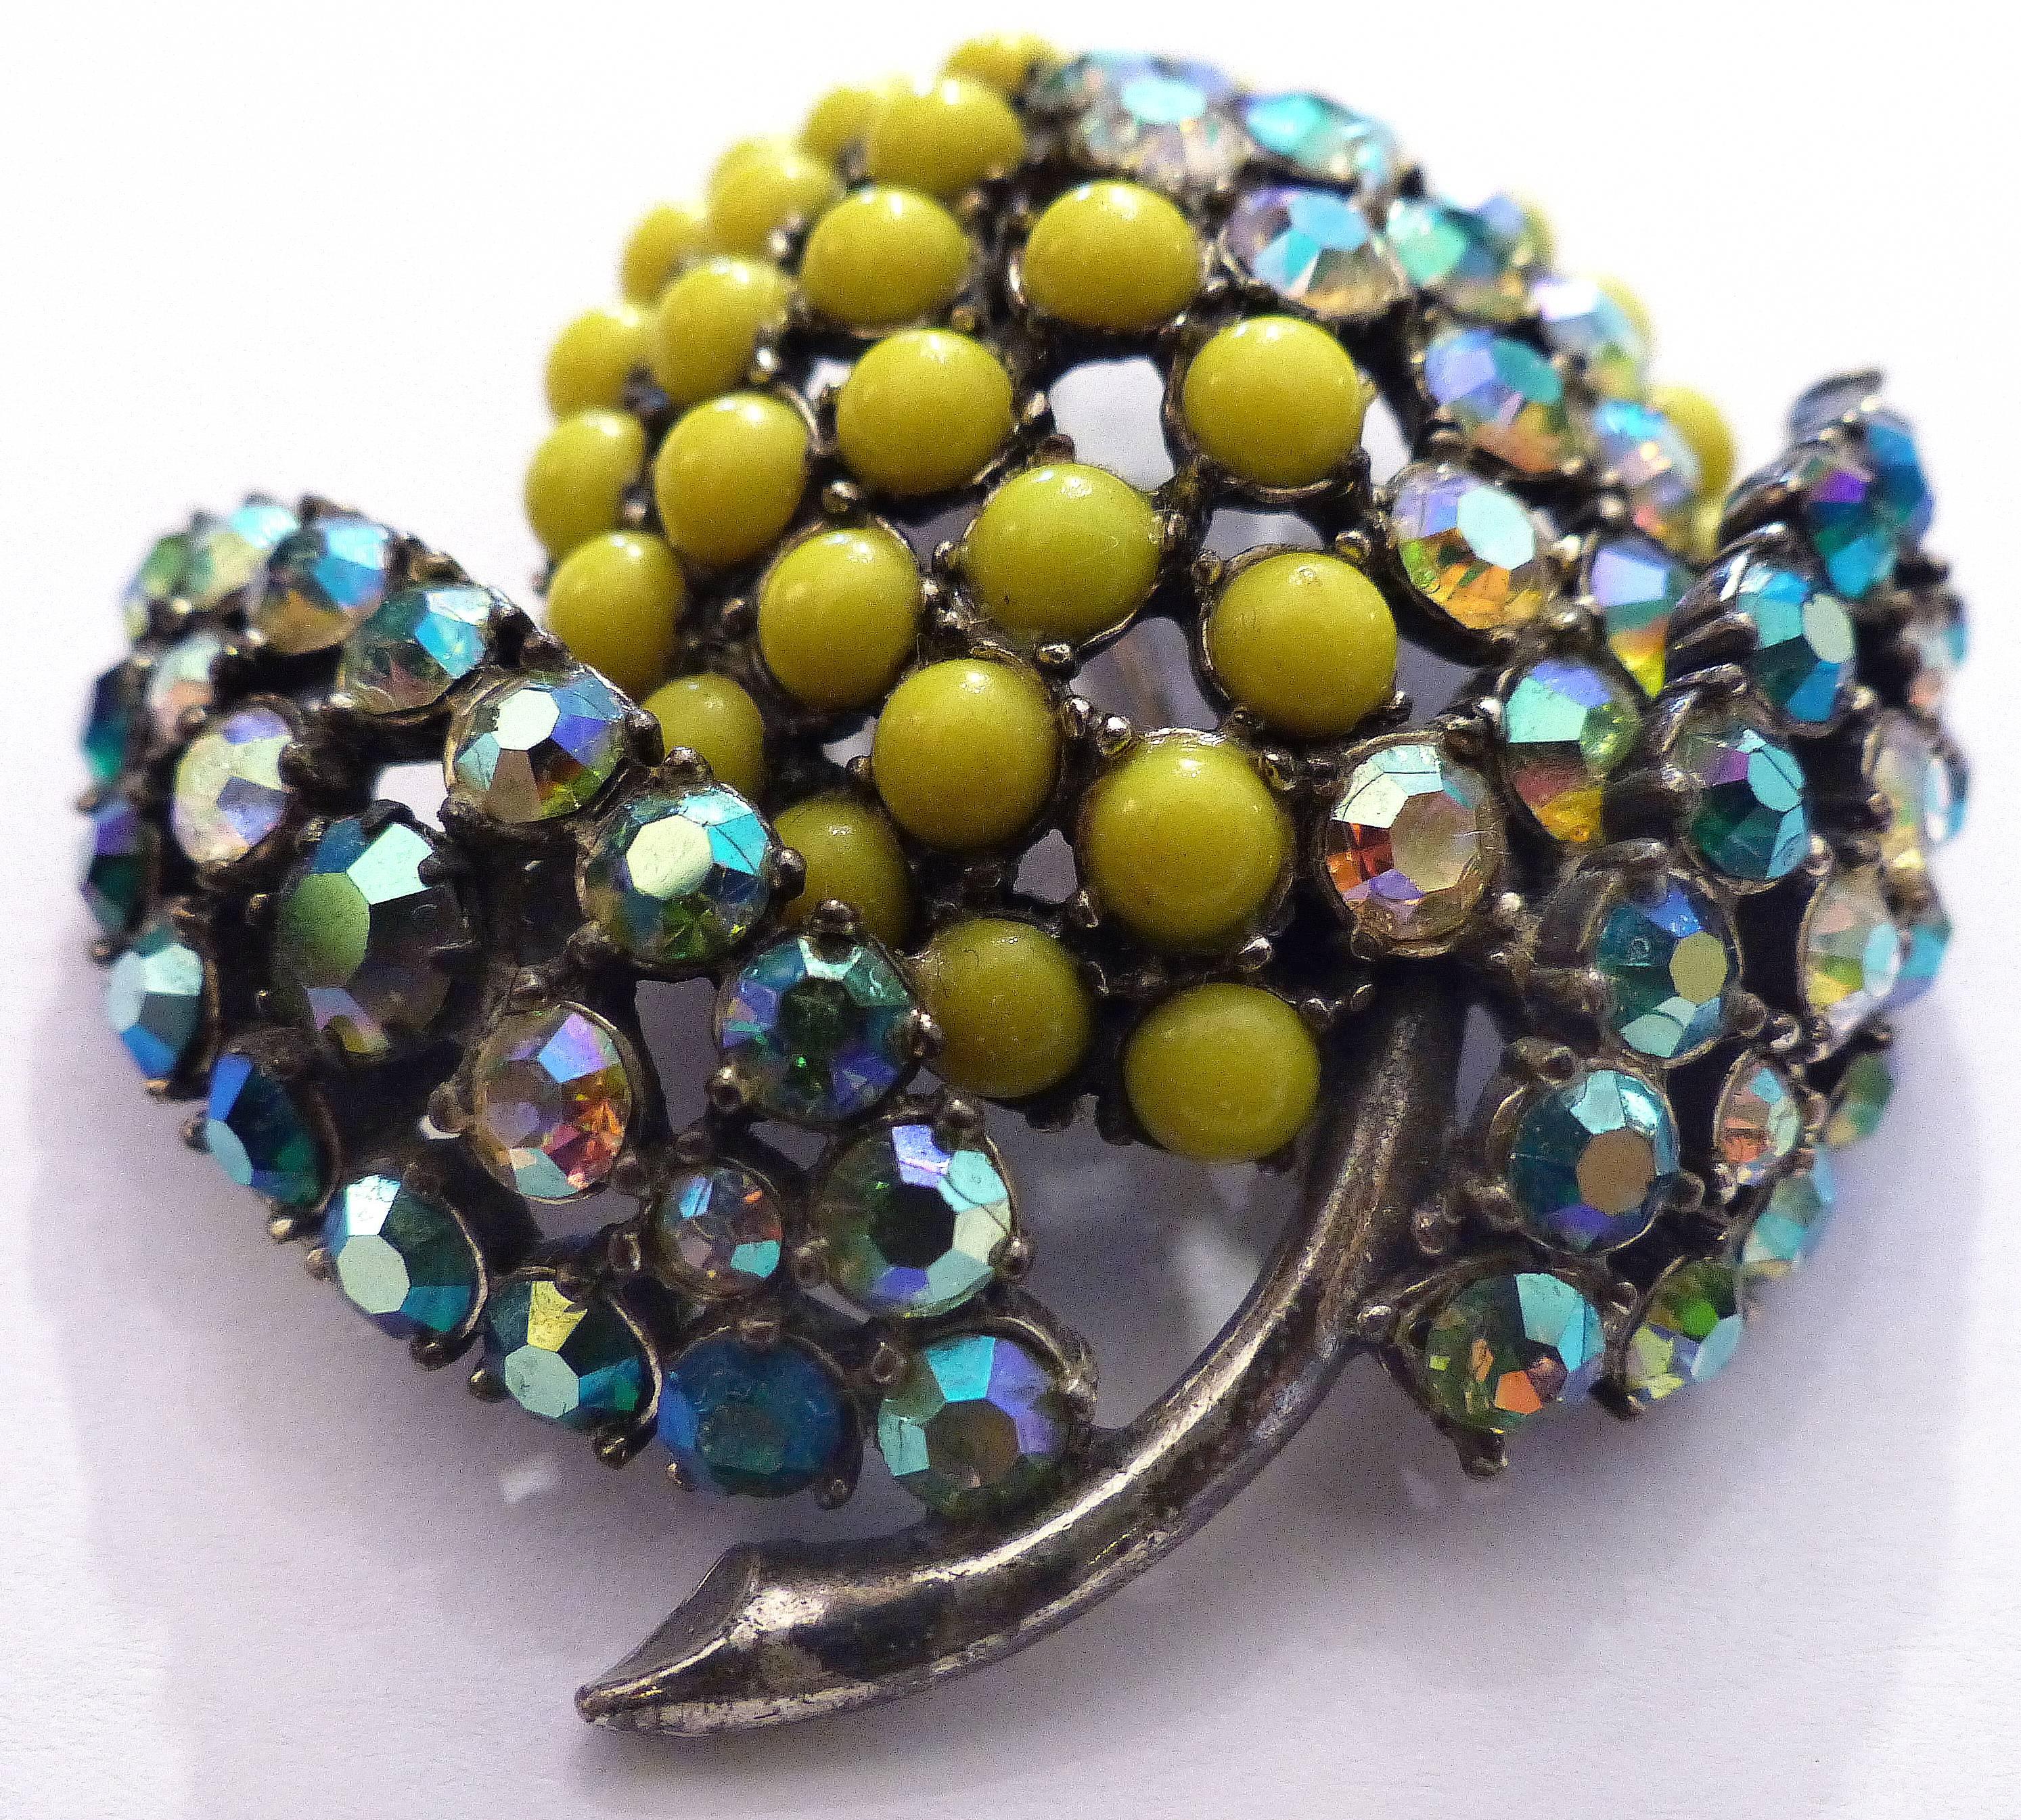 

A 1950s colorful rhinestones brooch created as a lemon is a fine example of Elsa Schiaparelli's work. Schiaparelli worked alongside Coco Chanel and was responsible for some of the greatest creations of the 20th century.
   